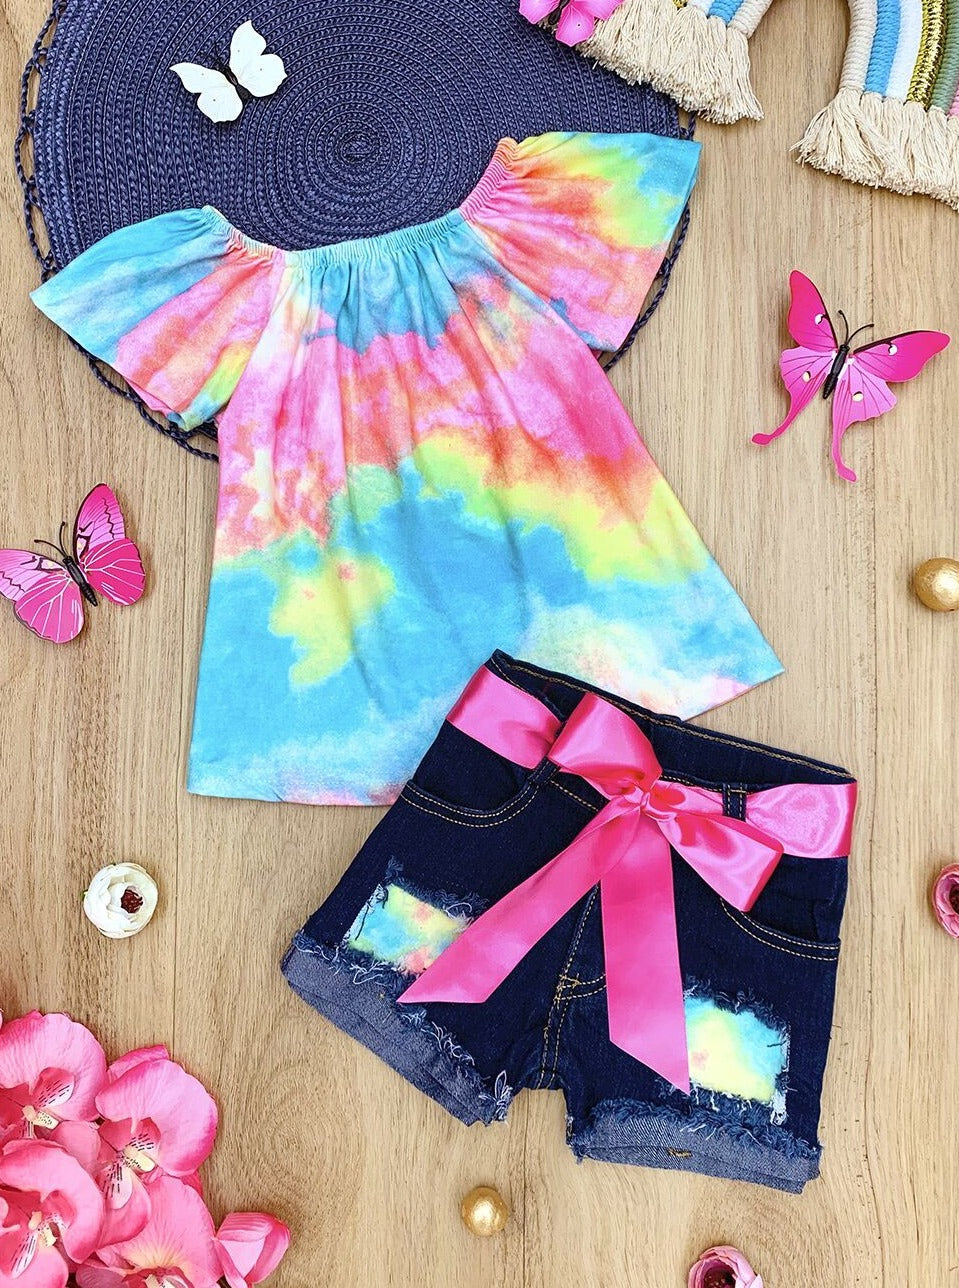 Girls Spring Outfits | Rainbow Tie Dye Top & Patched Denim Shorts Set